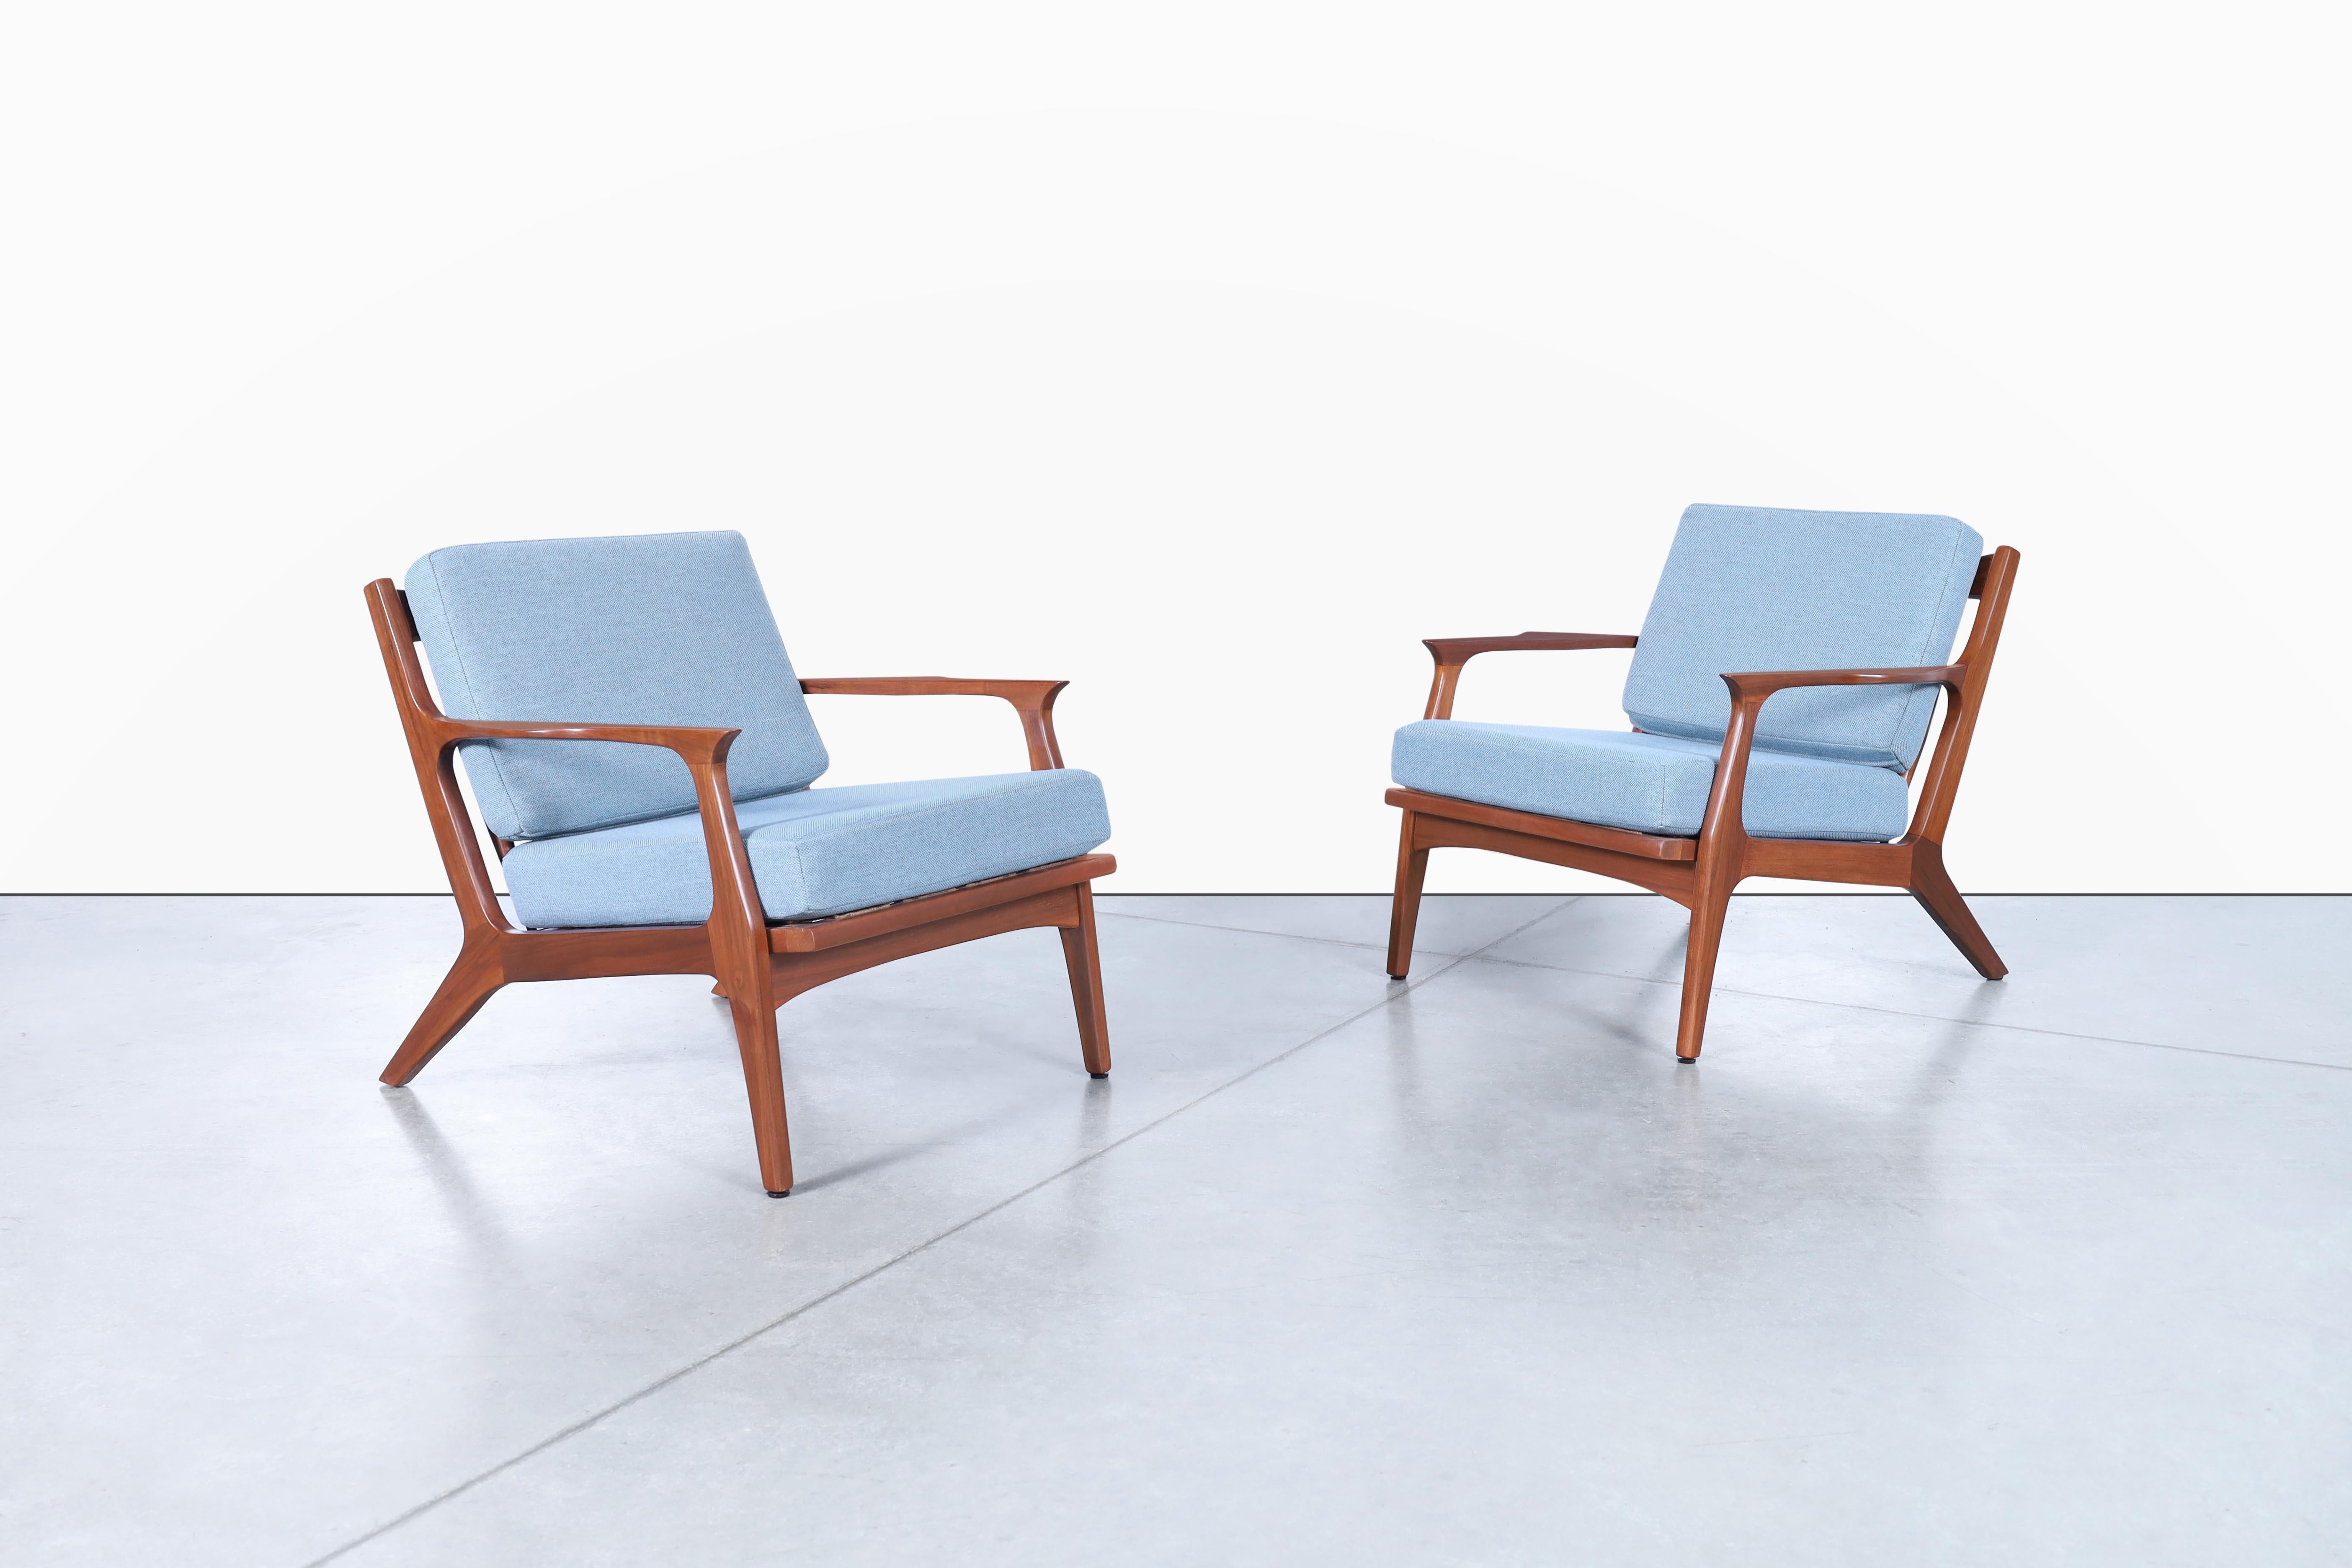 Stunning Danish modern walnut lounge chairs inspired by the iconic Danish designer Ib Kofod-Larsen for Selig in Denmark, circa 1960s. These chairs are truly stunning! The solid walnut frame is expertly crafted to create a sleek and elegant profile